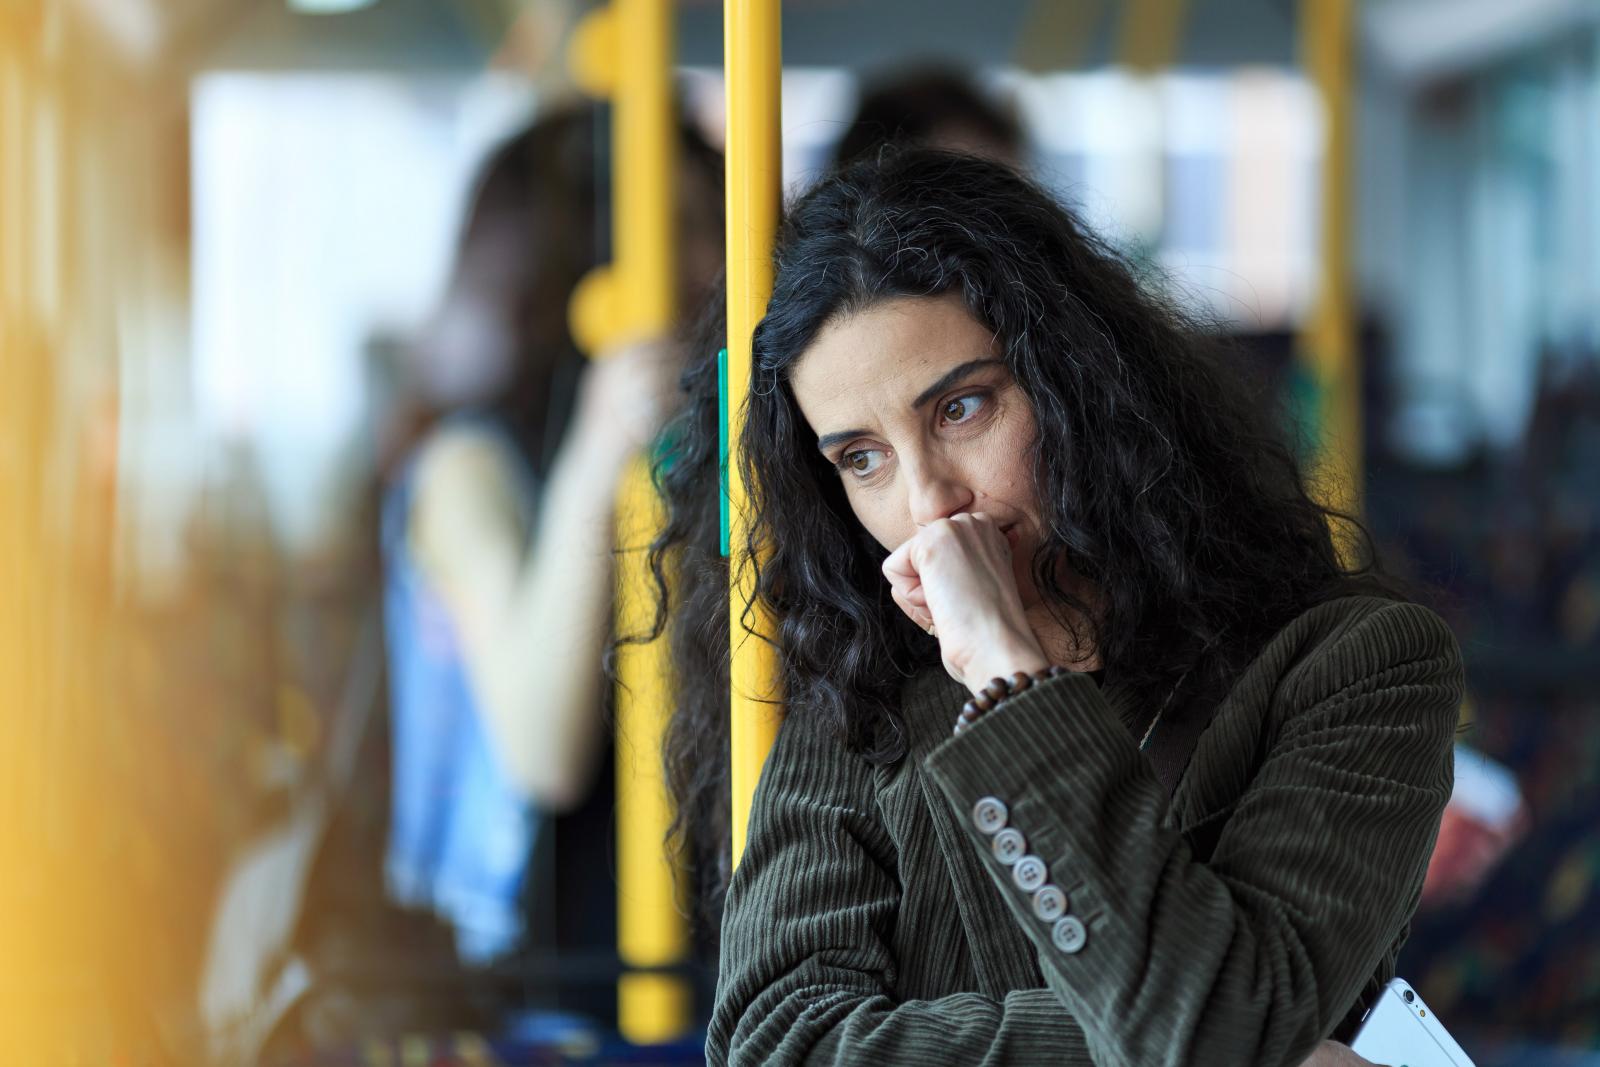 A women looking concerned on a bus